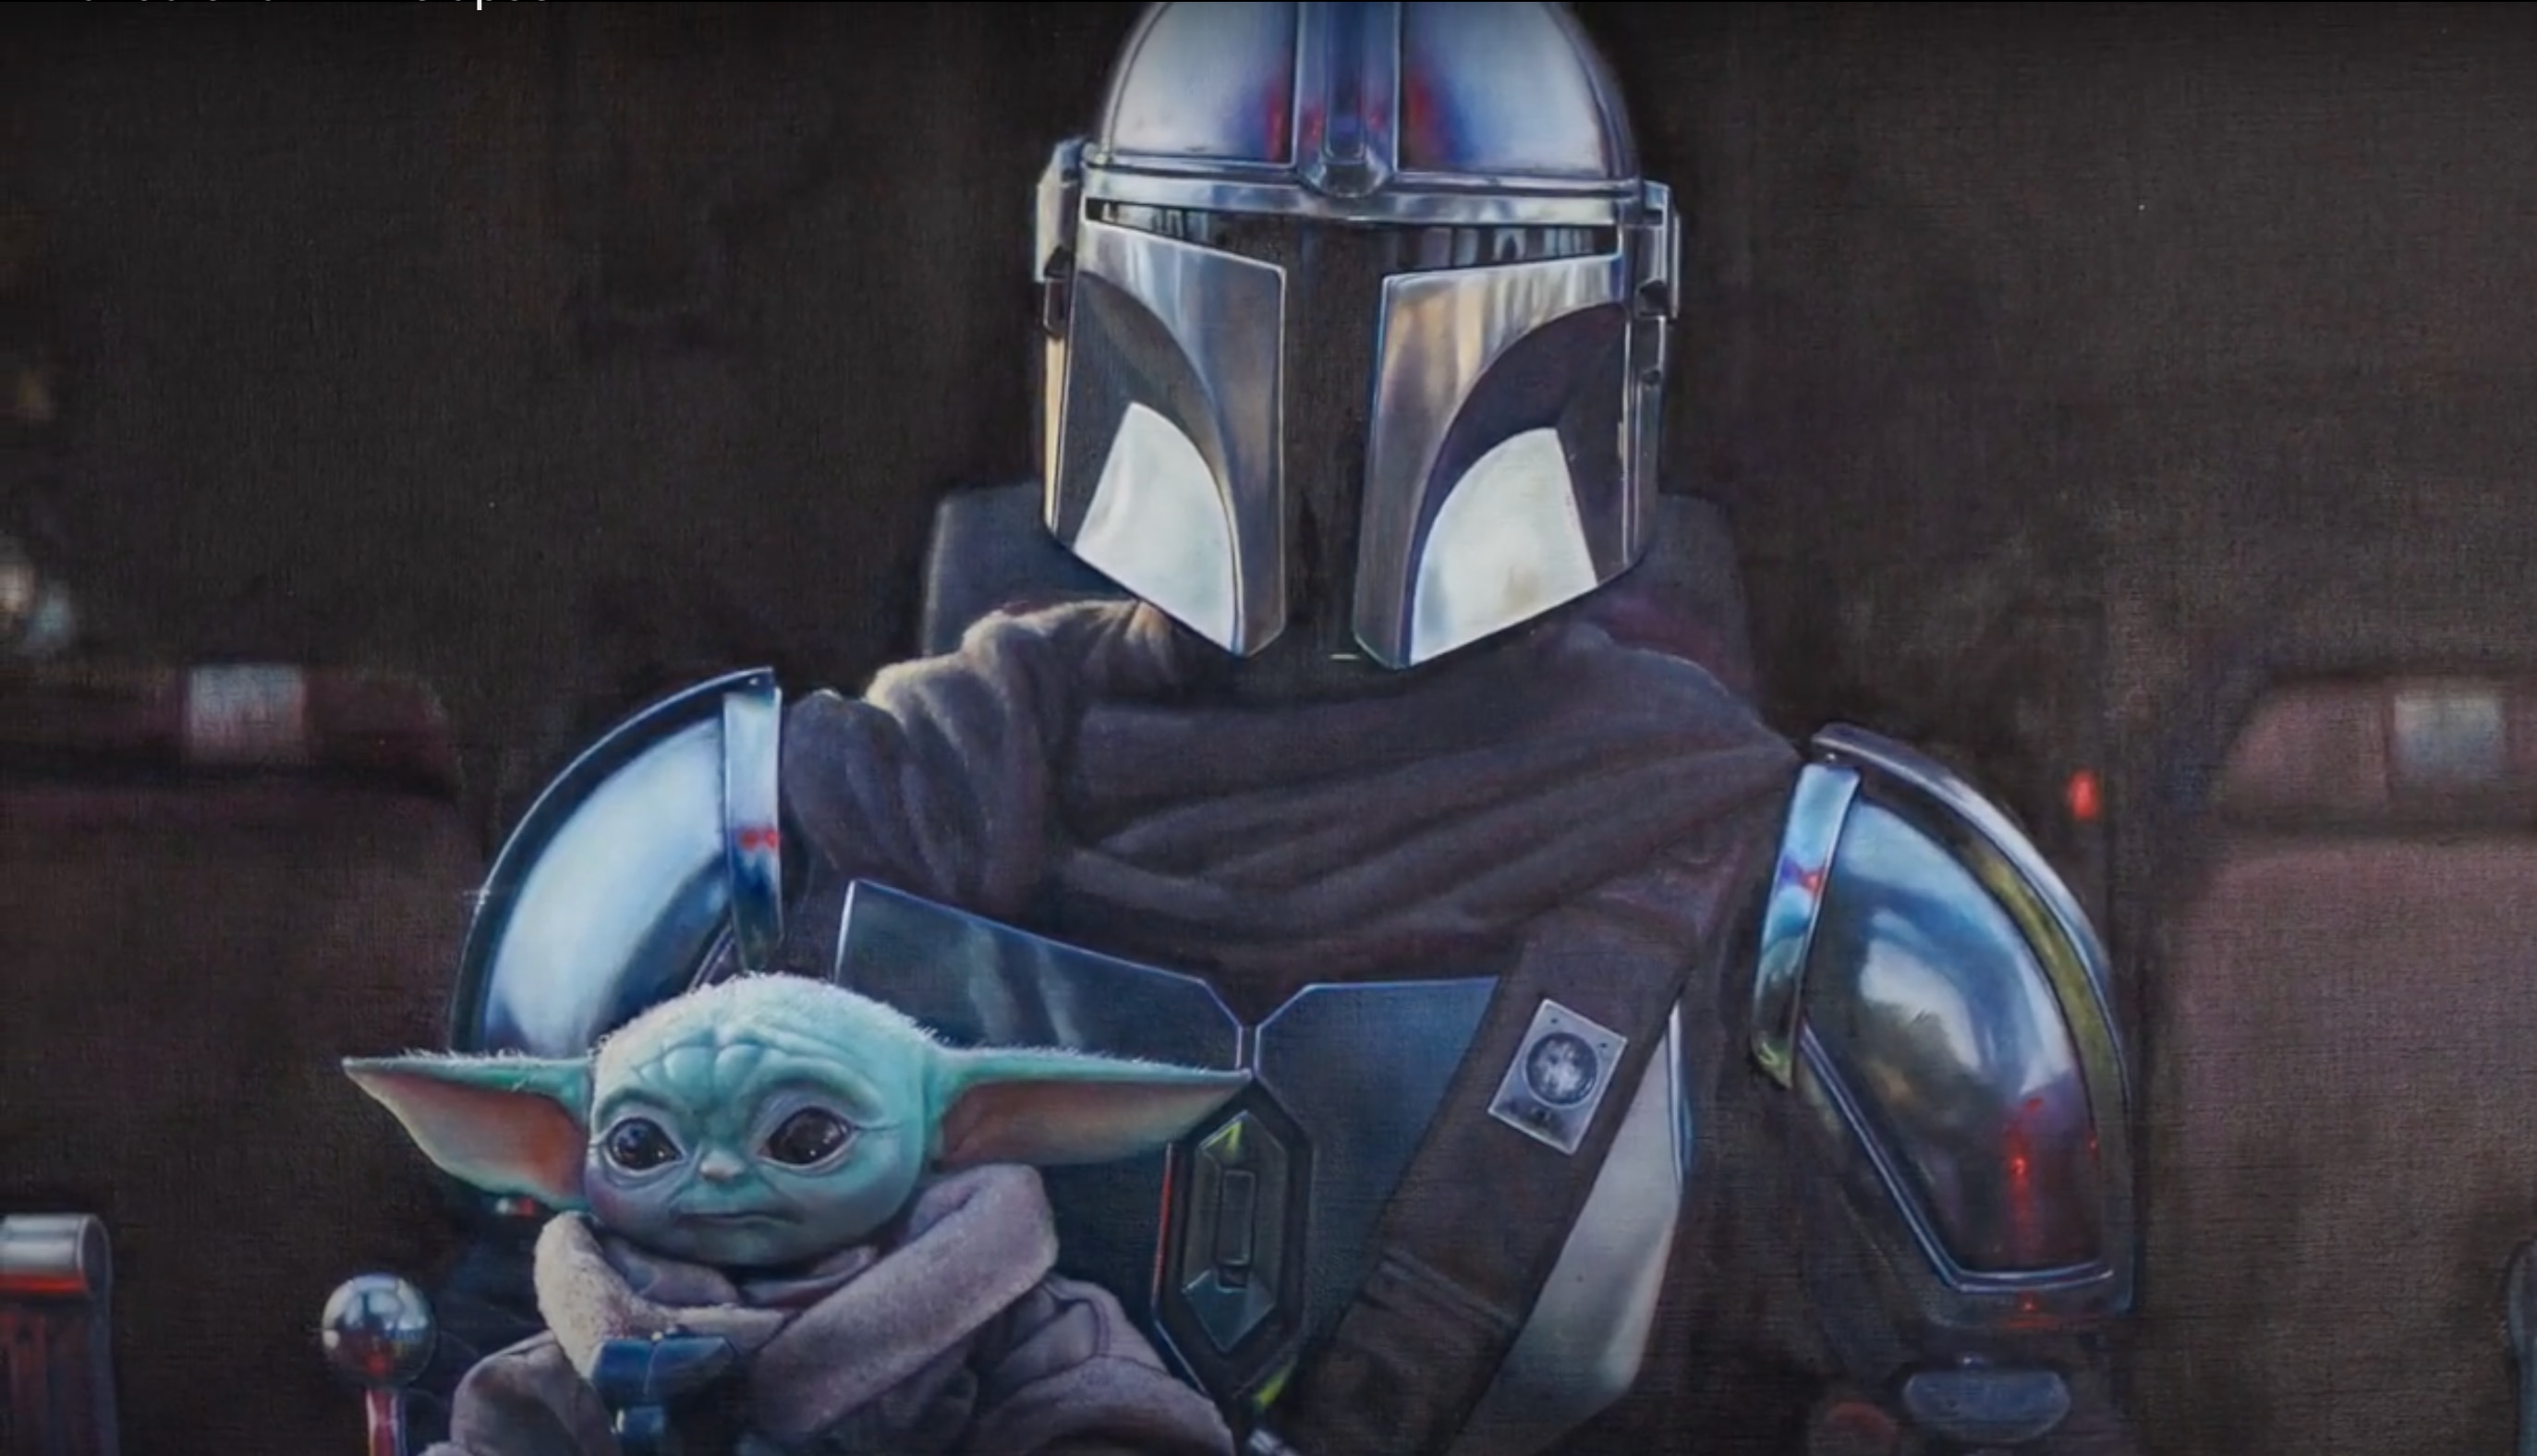 mandalorian-and-child-painting-welcome-to-the-blumhouse-2021-lineup